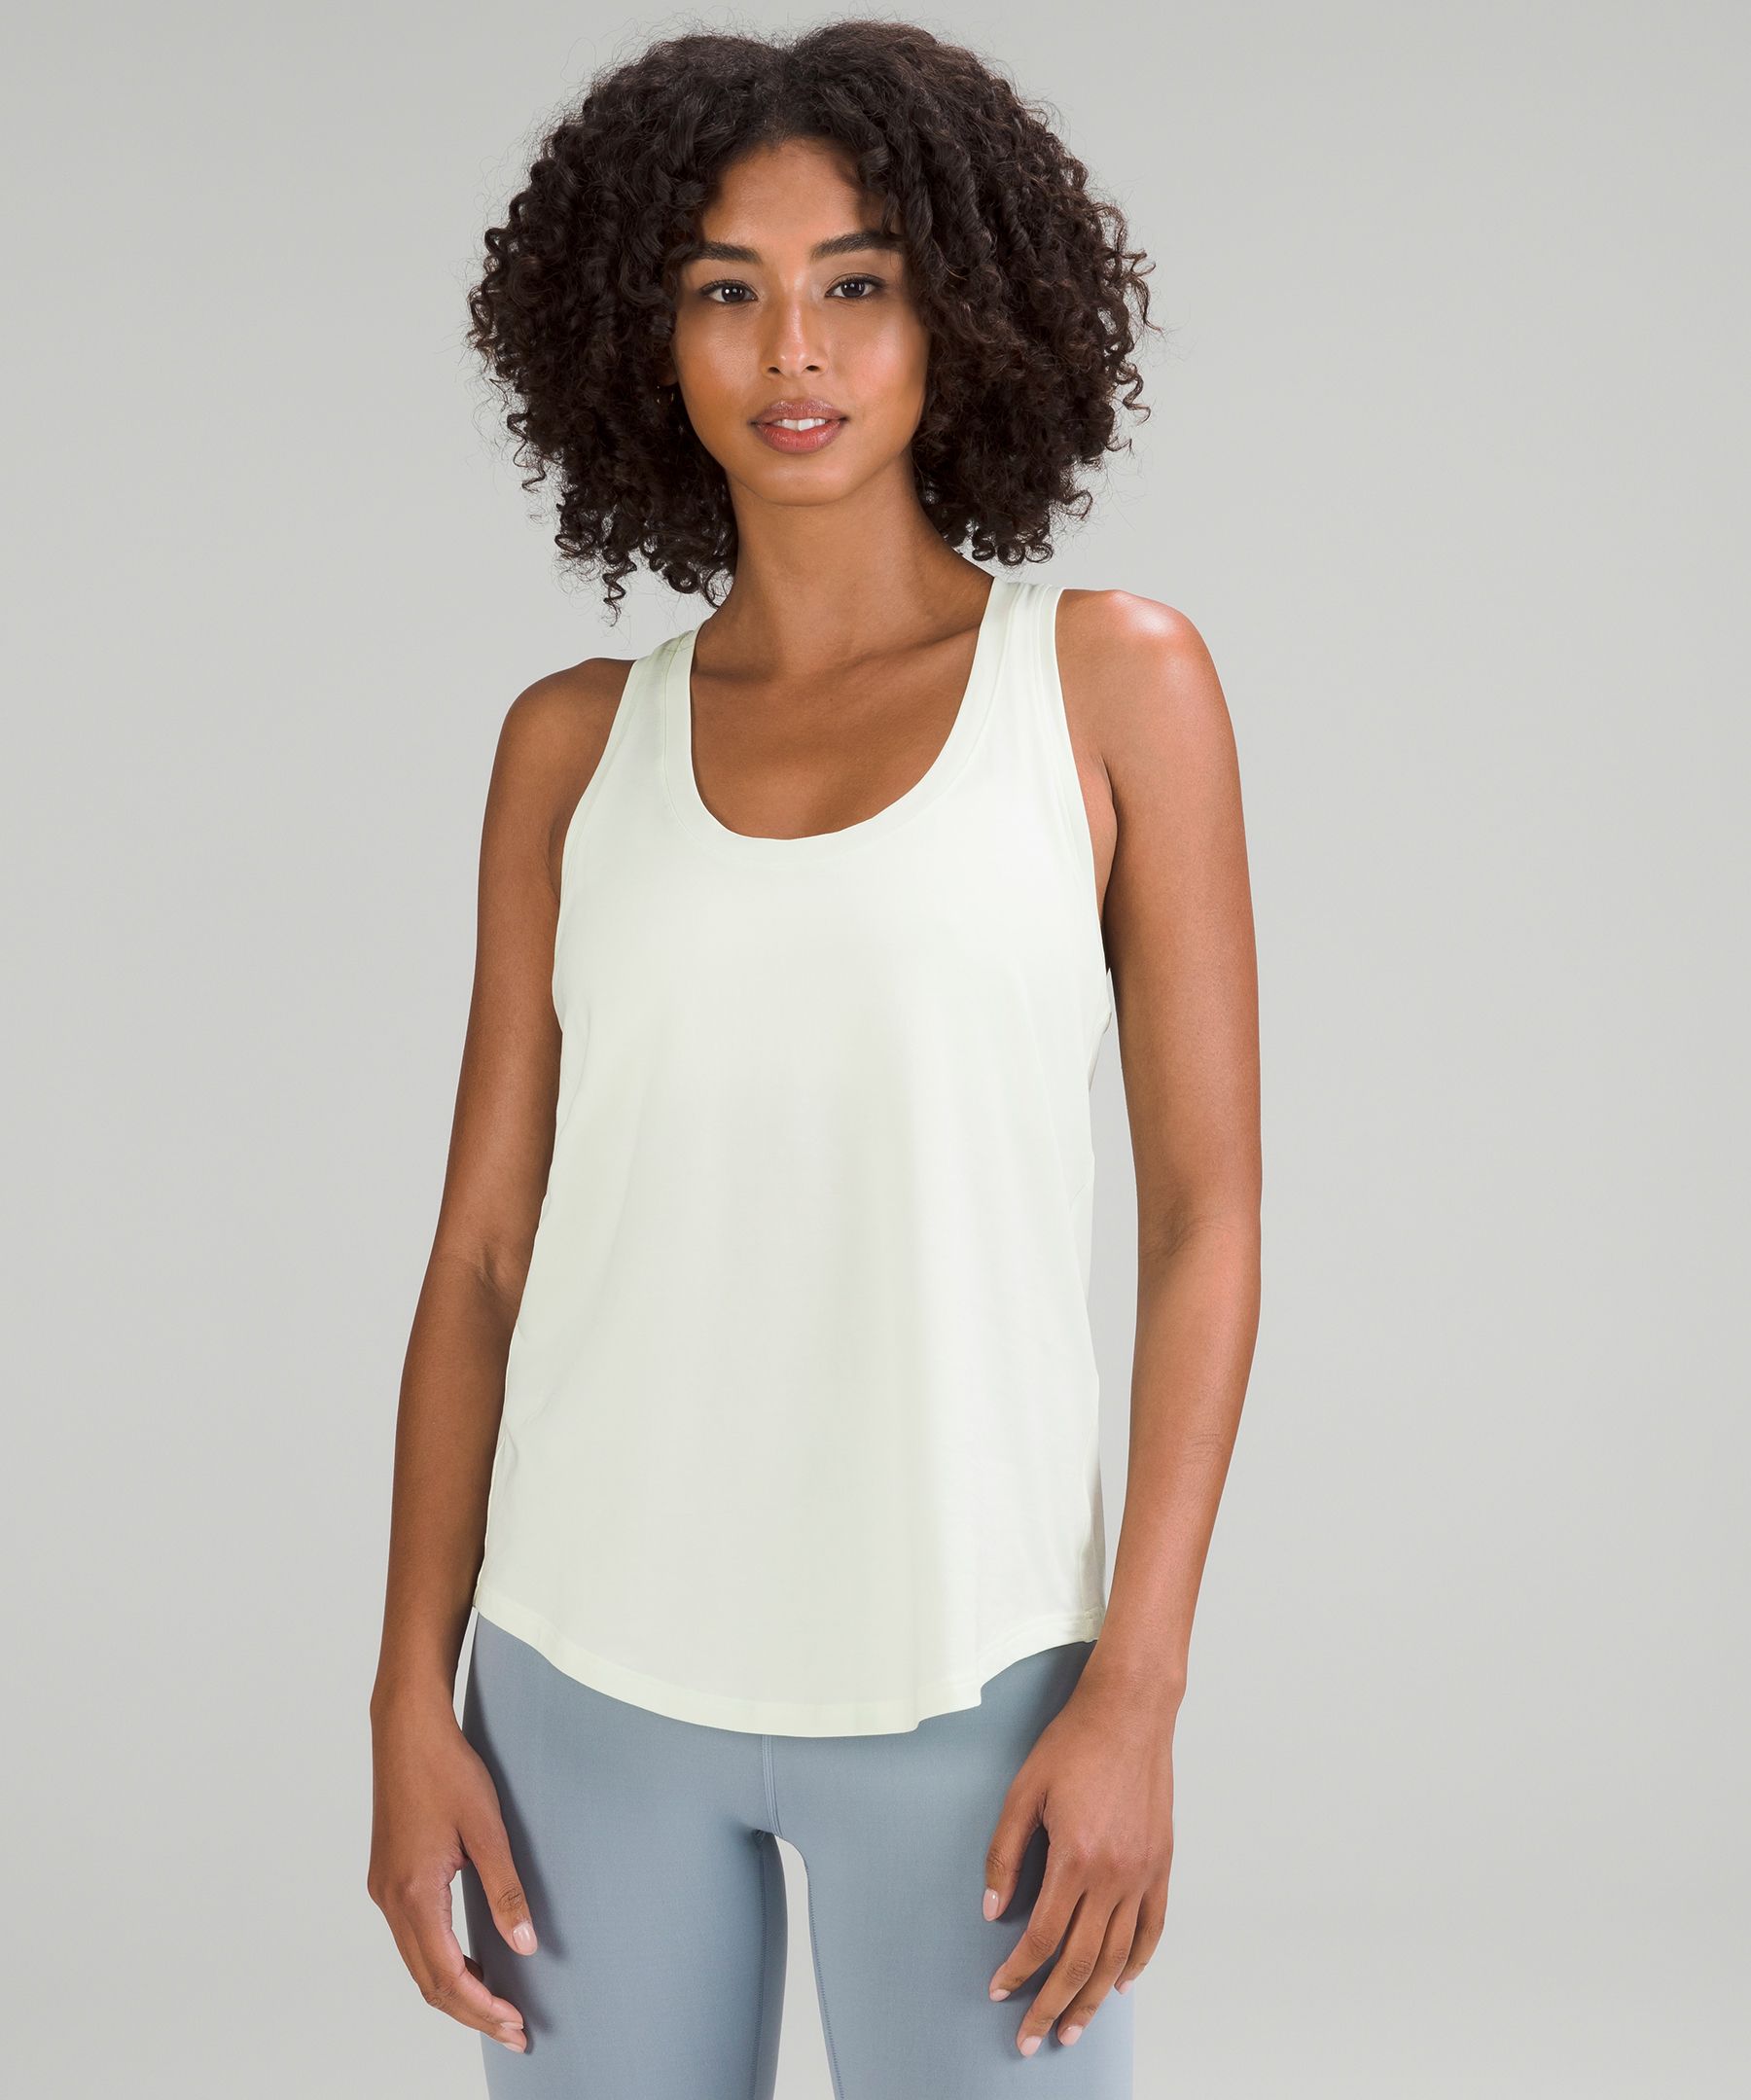 Women's Tank Top Sport Fitness Top for Women - Wavyy casual